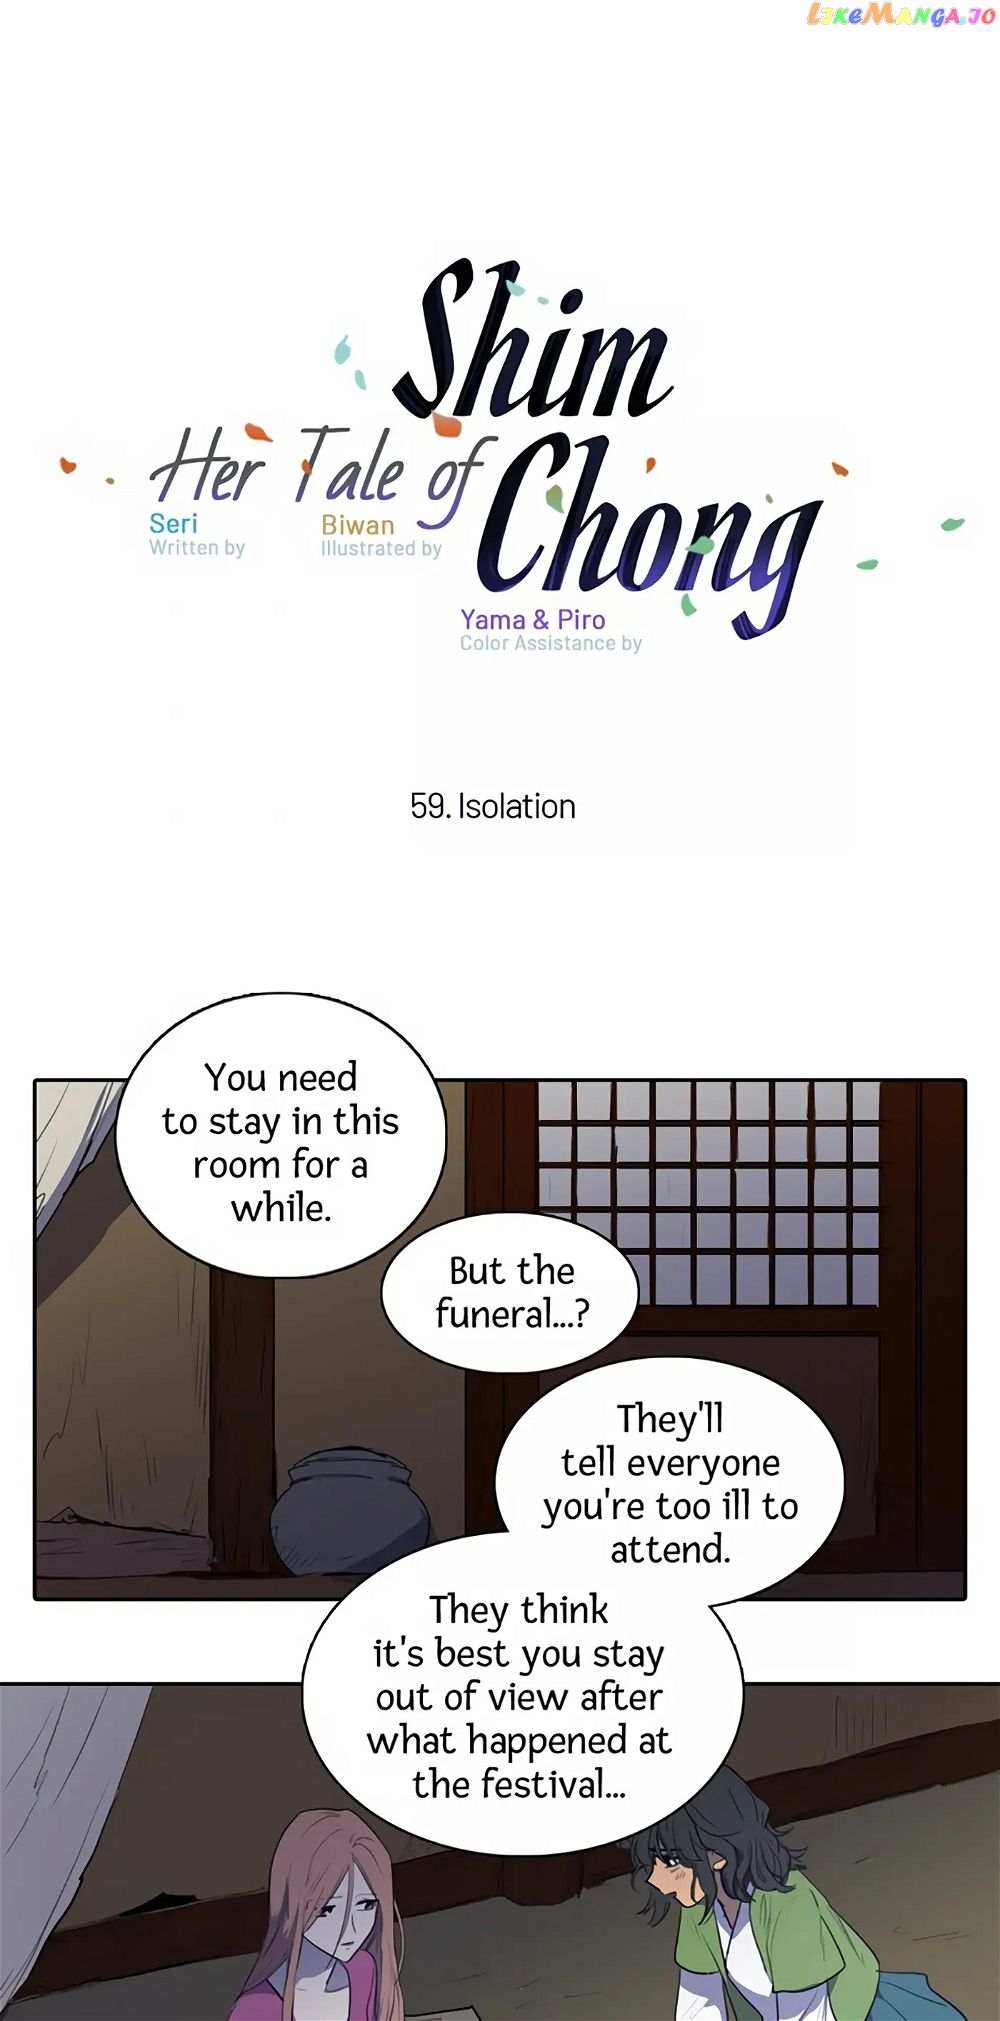 Her Tale of Shim Chong Chapter 59 - Page 1